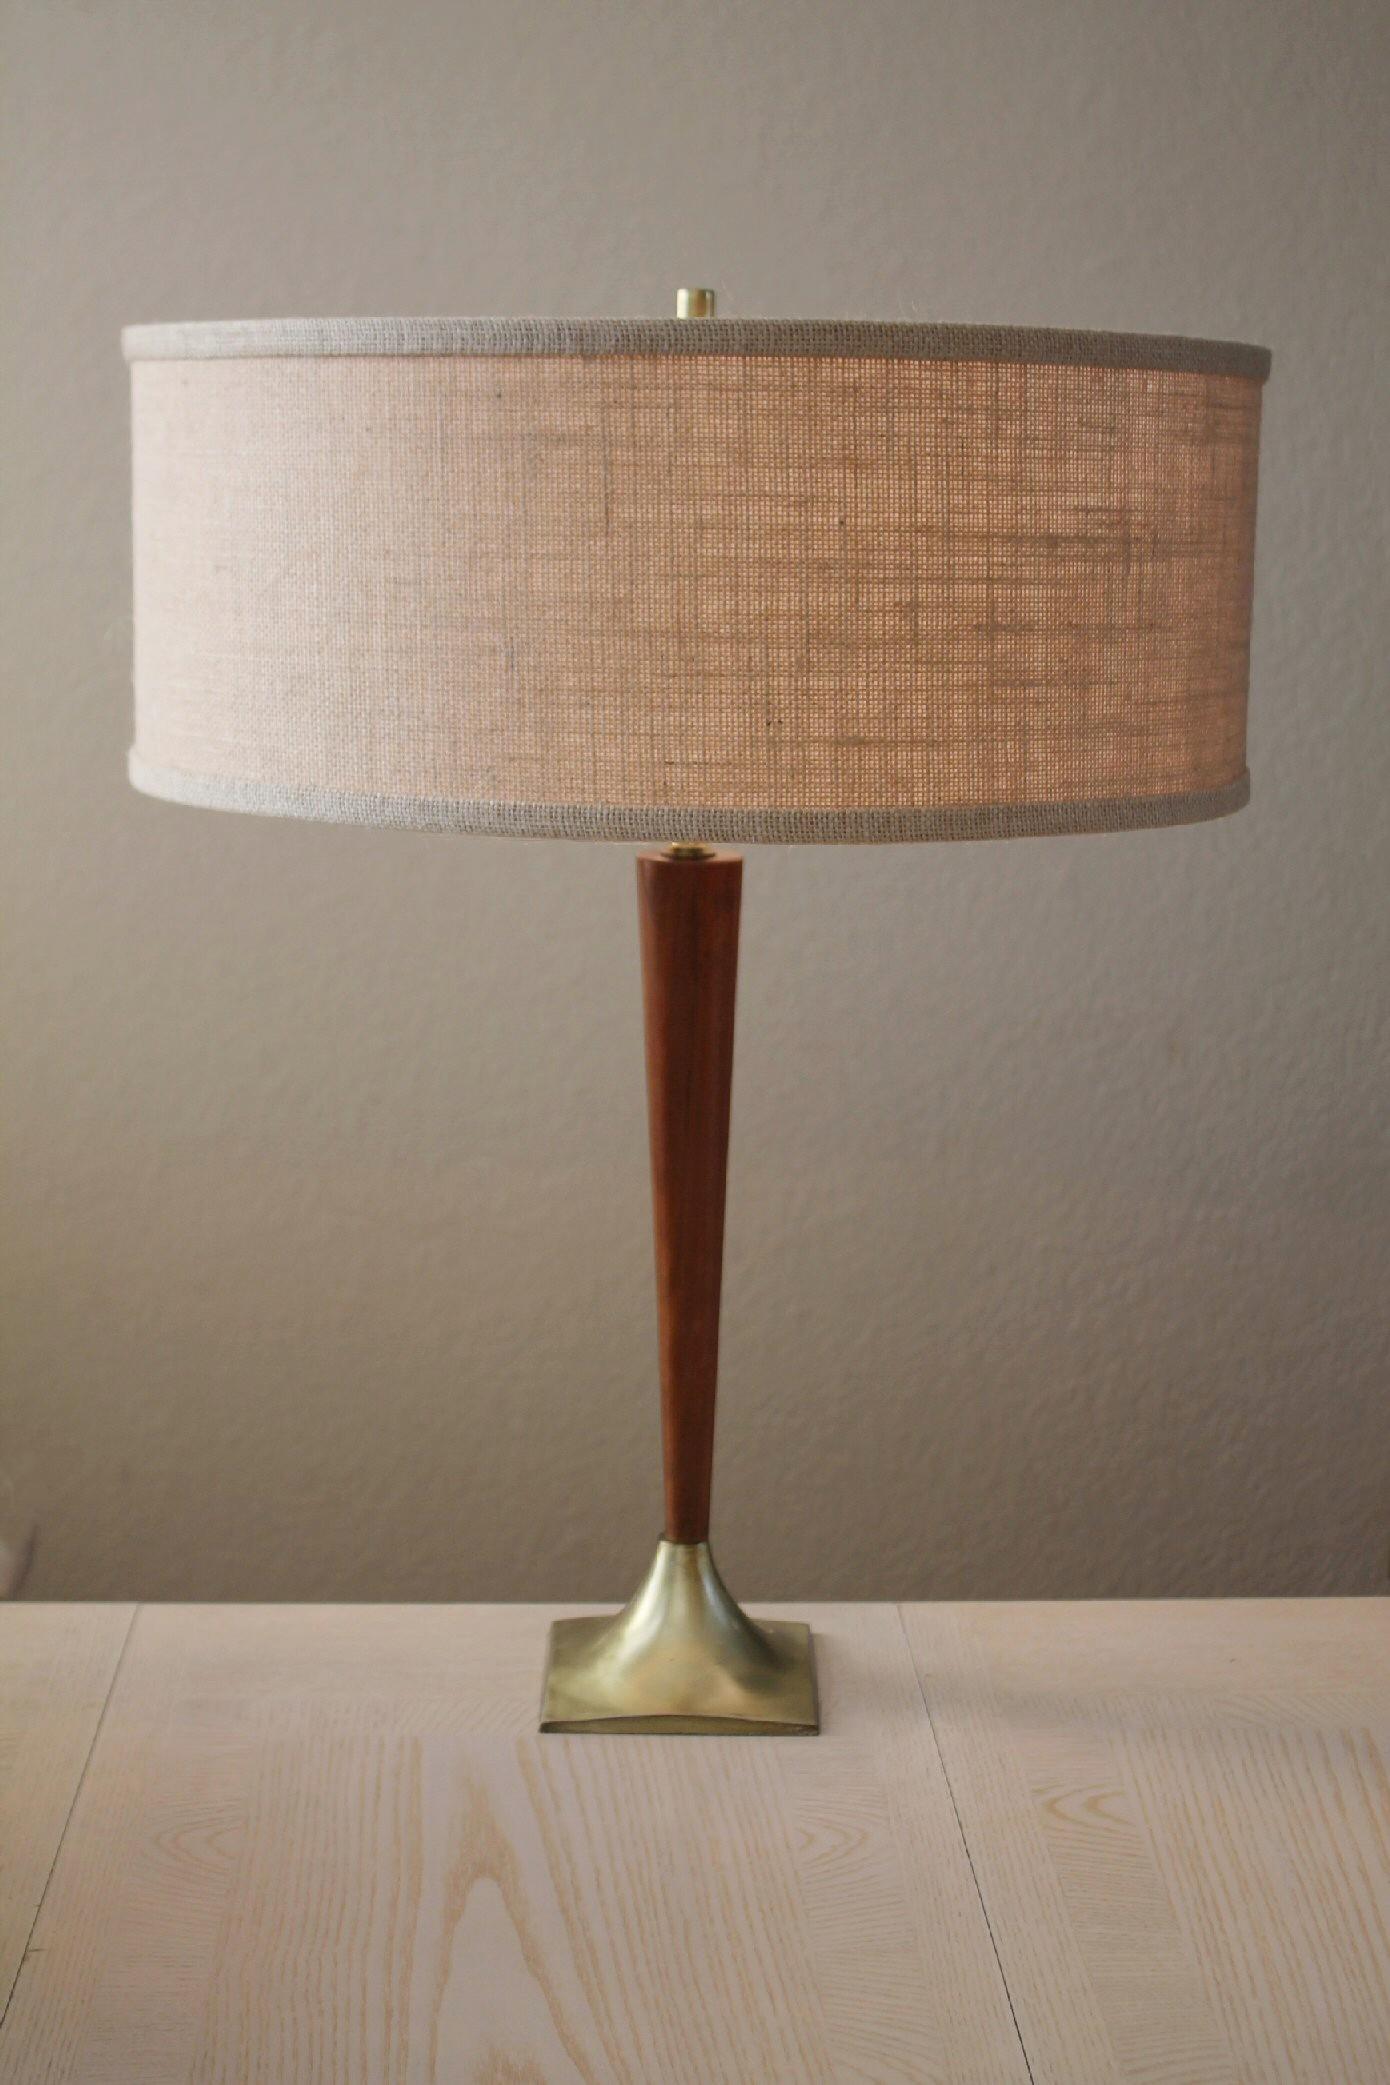 GORGEOUS!


  
SCULPTURED DANISH MODERN
SLEEK SHAPED WALNUT & BRASS
TABLE LAMP!

SUPER CLEAN LINES & STYLE!

 BEAUTIFUL!

( DIMENSIONS:  APPROX. 23